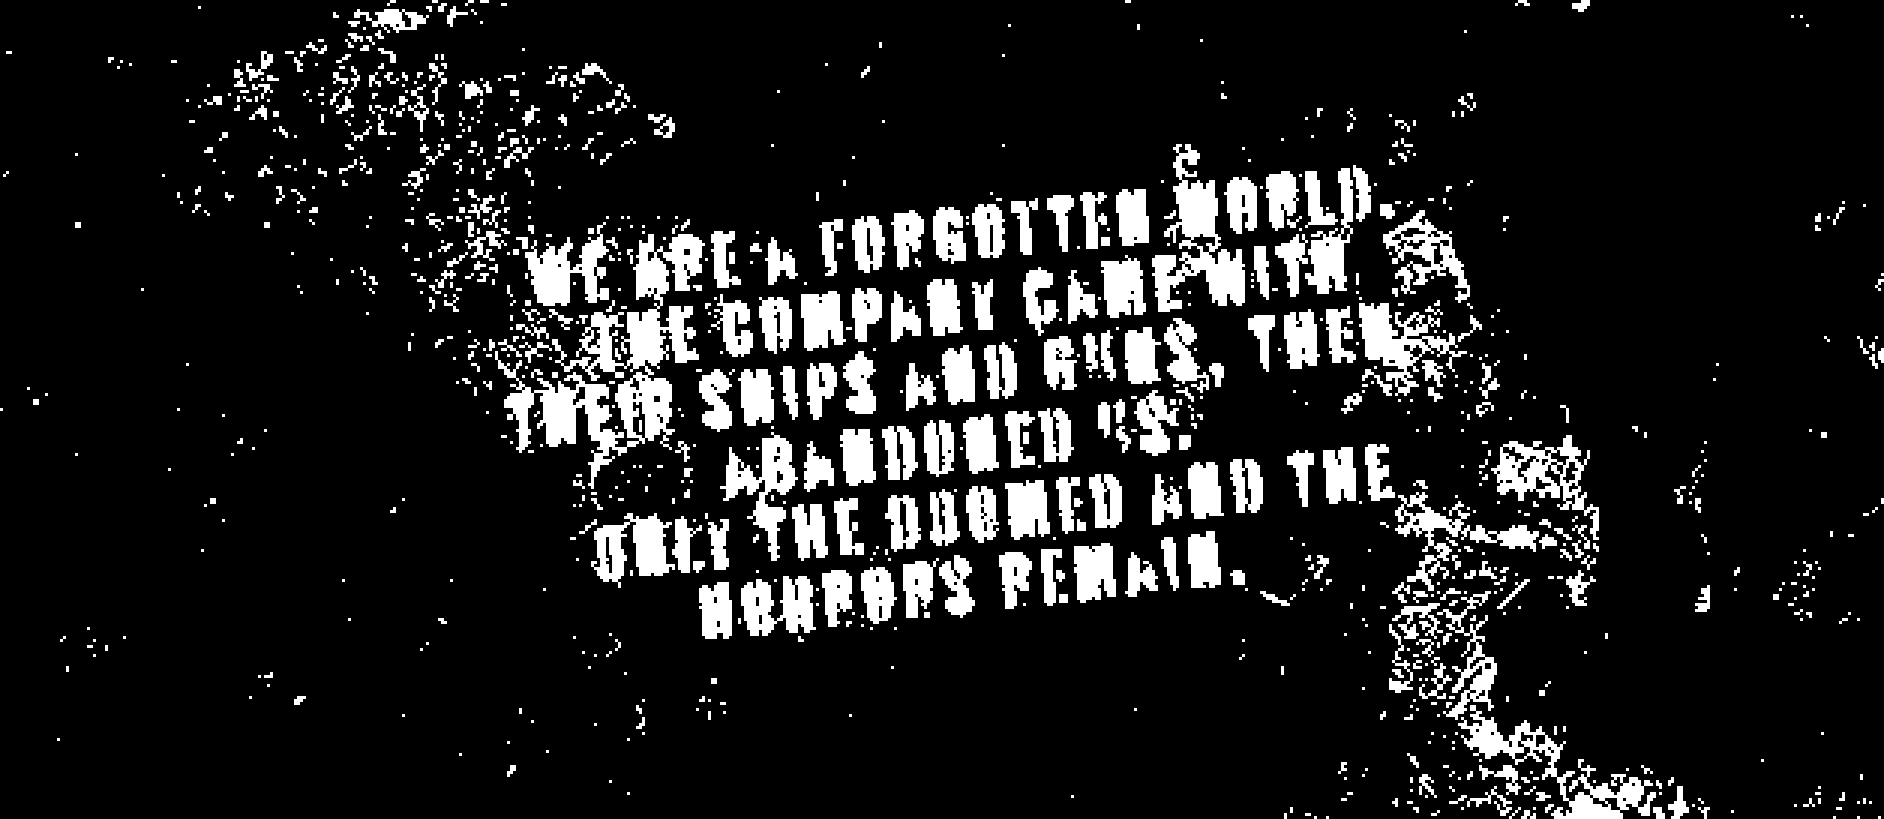 Quote from The Doomed: “We are a forgotten world. The company came with their ships and guns, then abandoned us. Only the doomed and the horrors remain.”